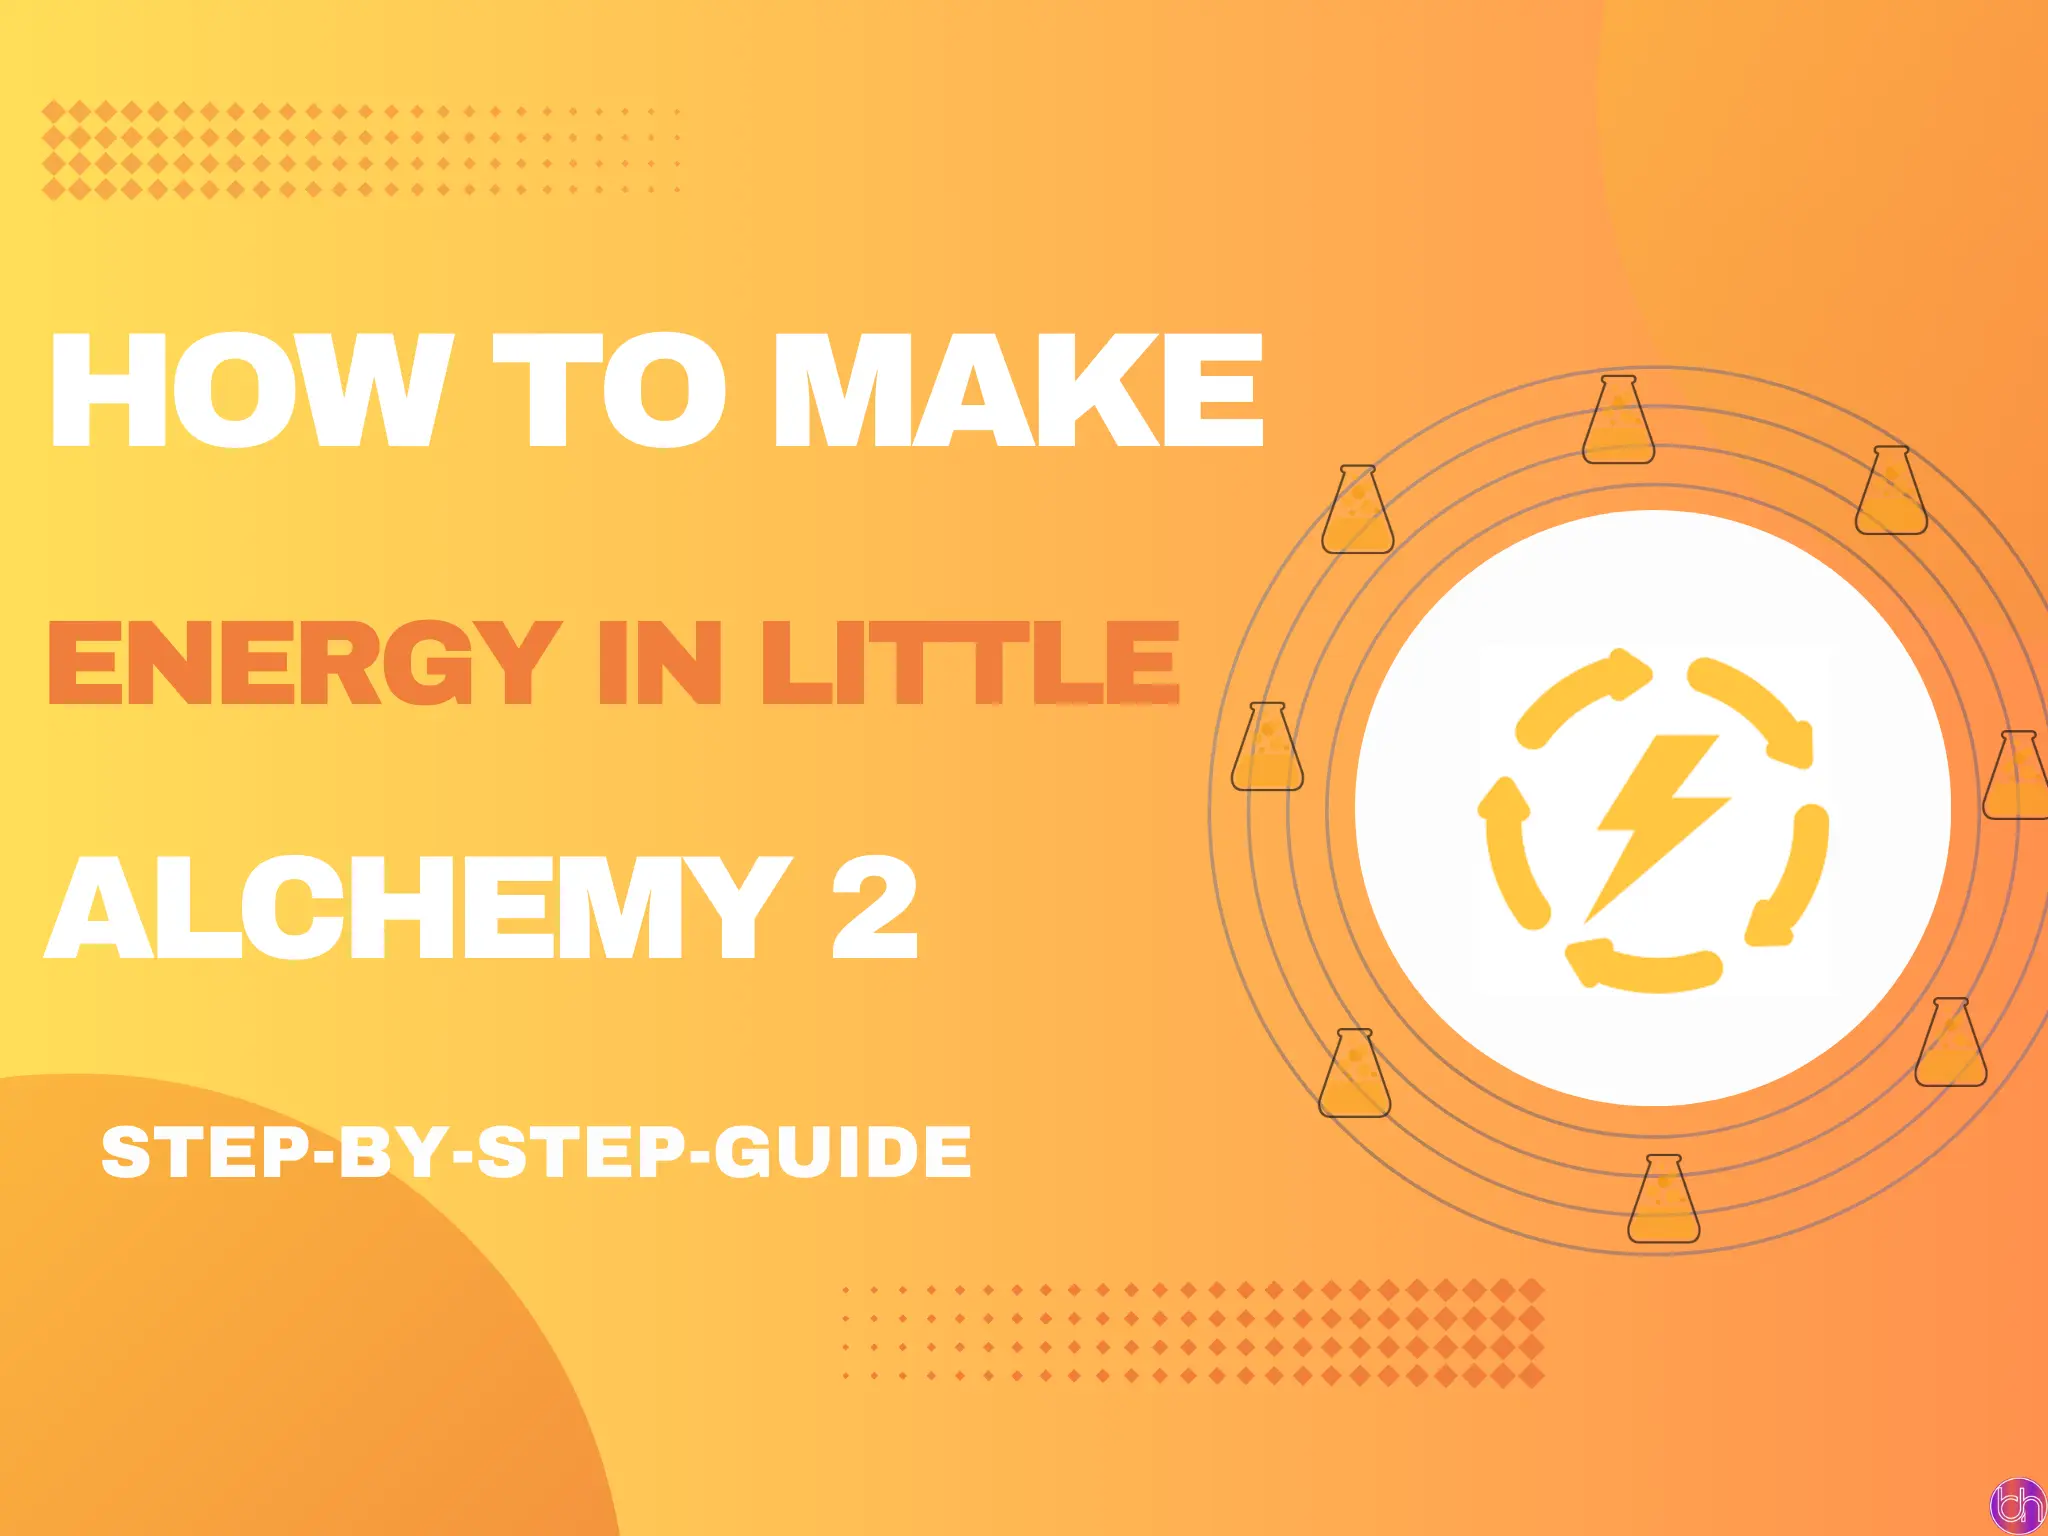 How to make energy in little alchemy 2